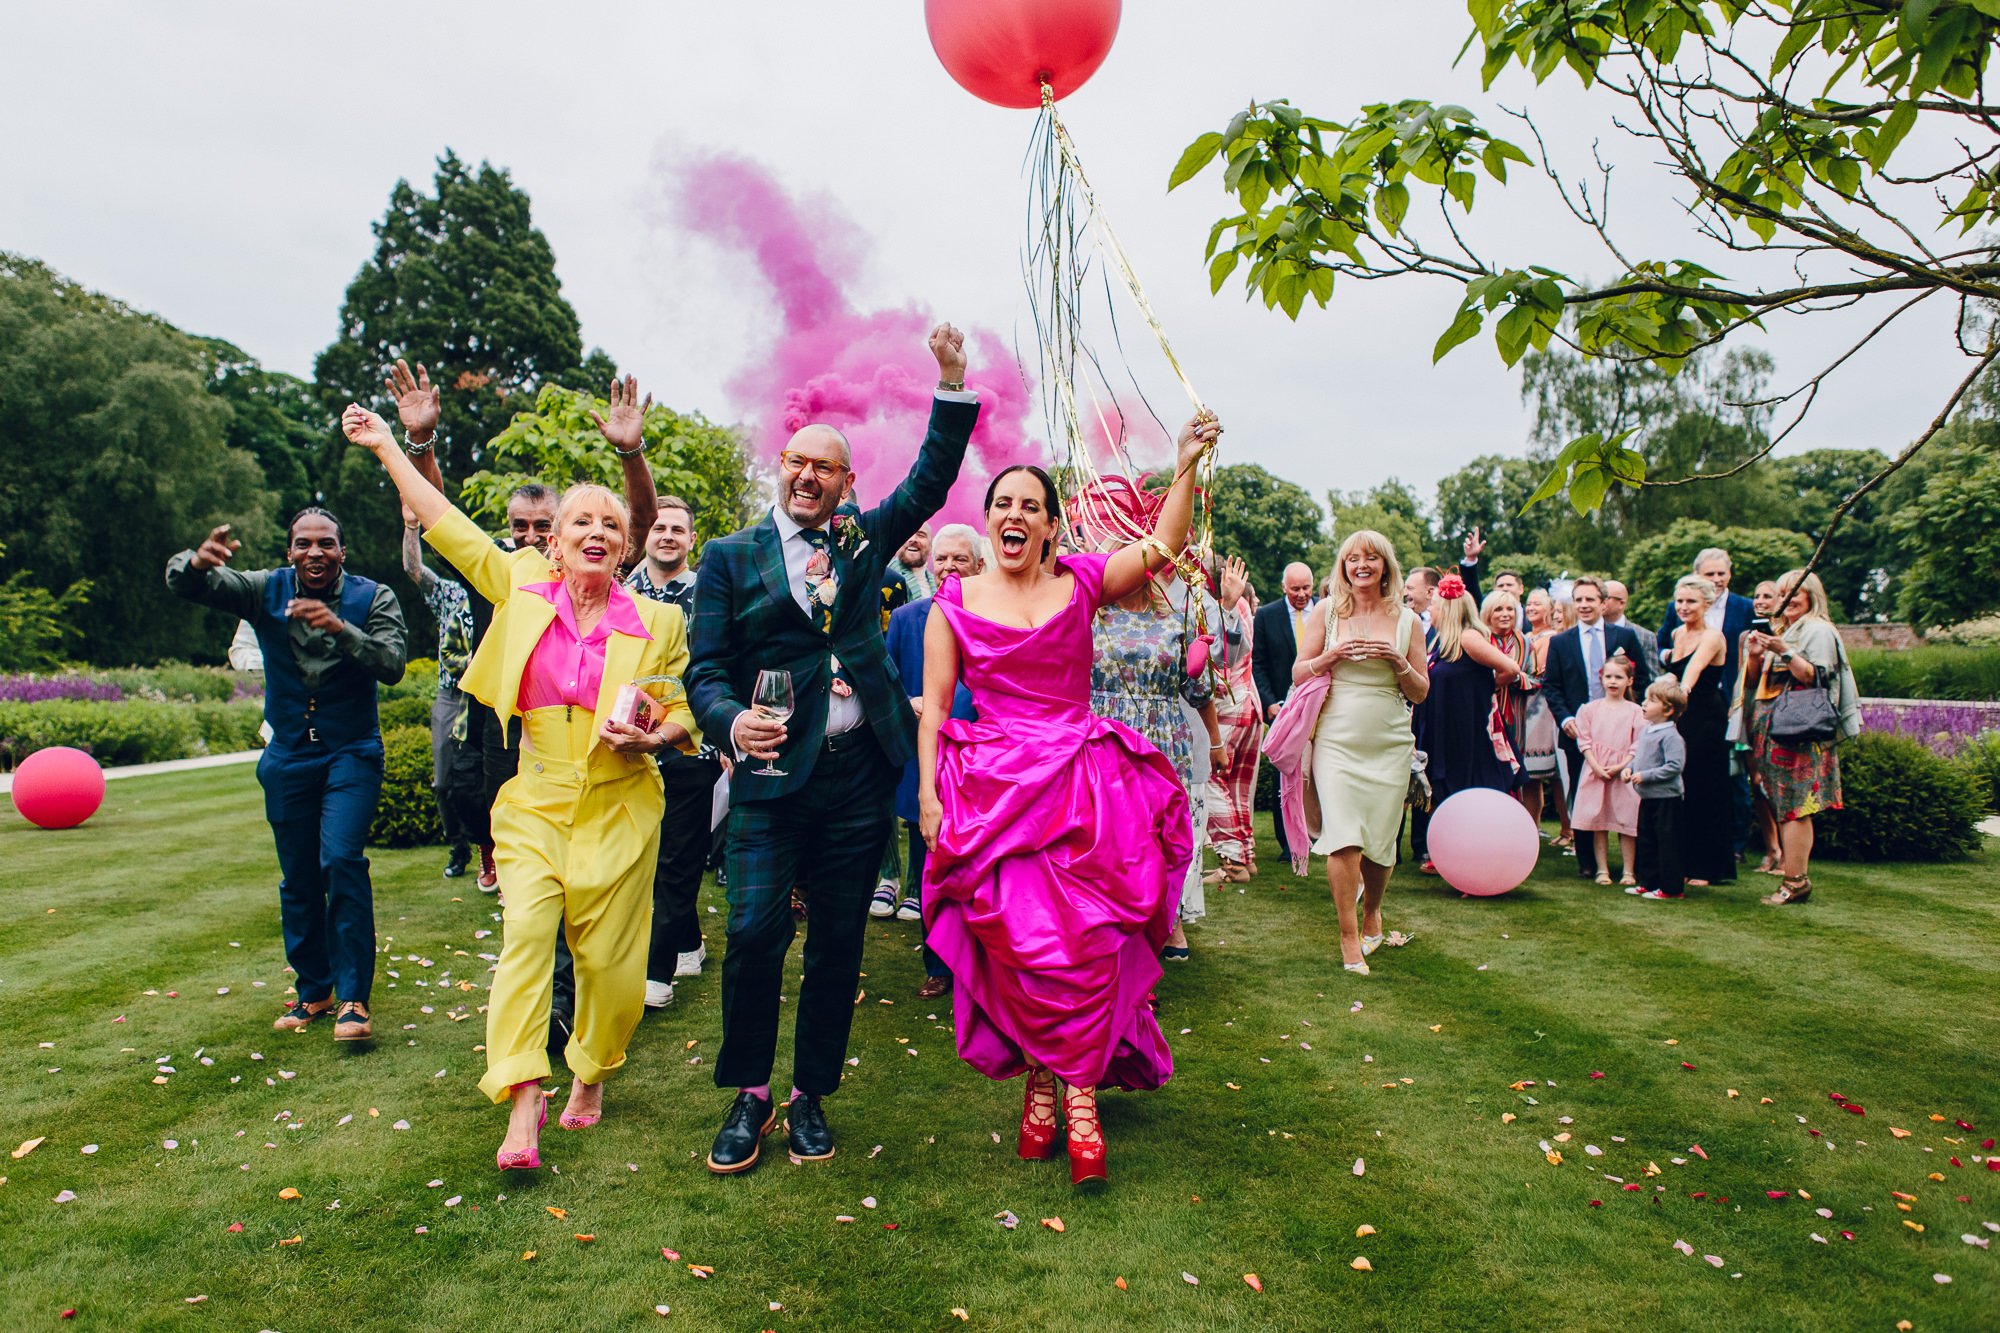  A colourful image taken by the wedding photographer. The creative composition captures the bride and groom leading the wedding party across the grass. The bride is wearing a bright pink wedding dress and carrying a big, round, red balloon. She is wa